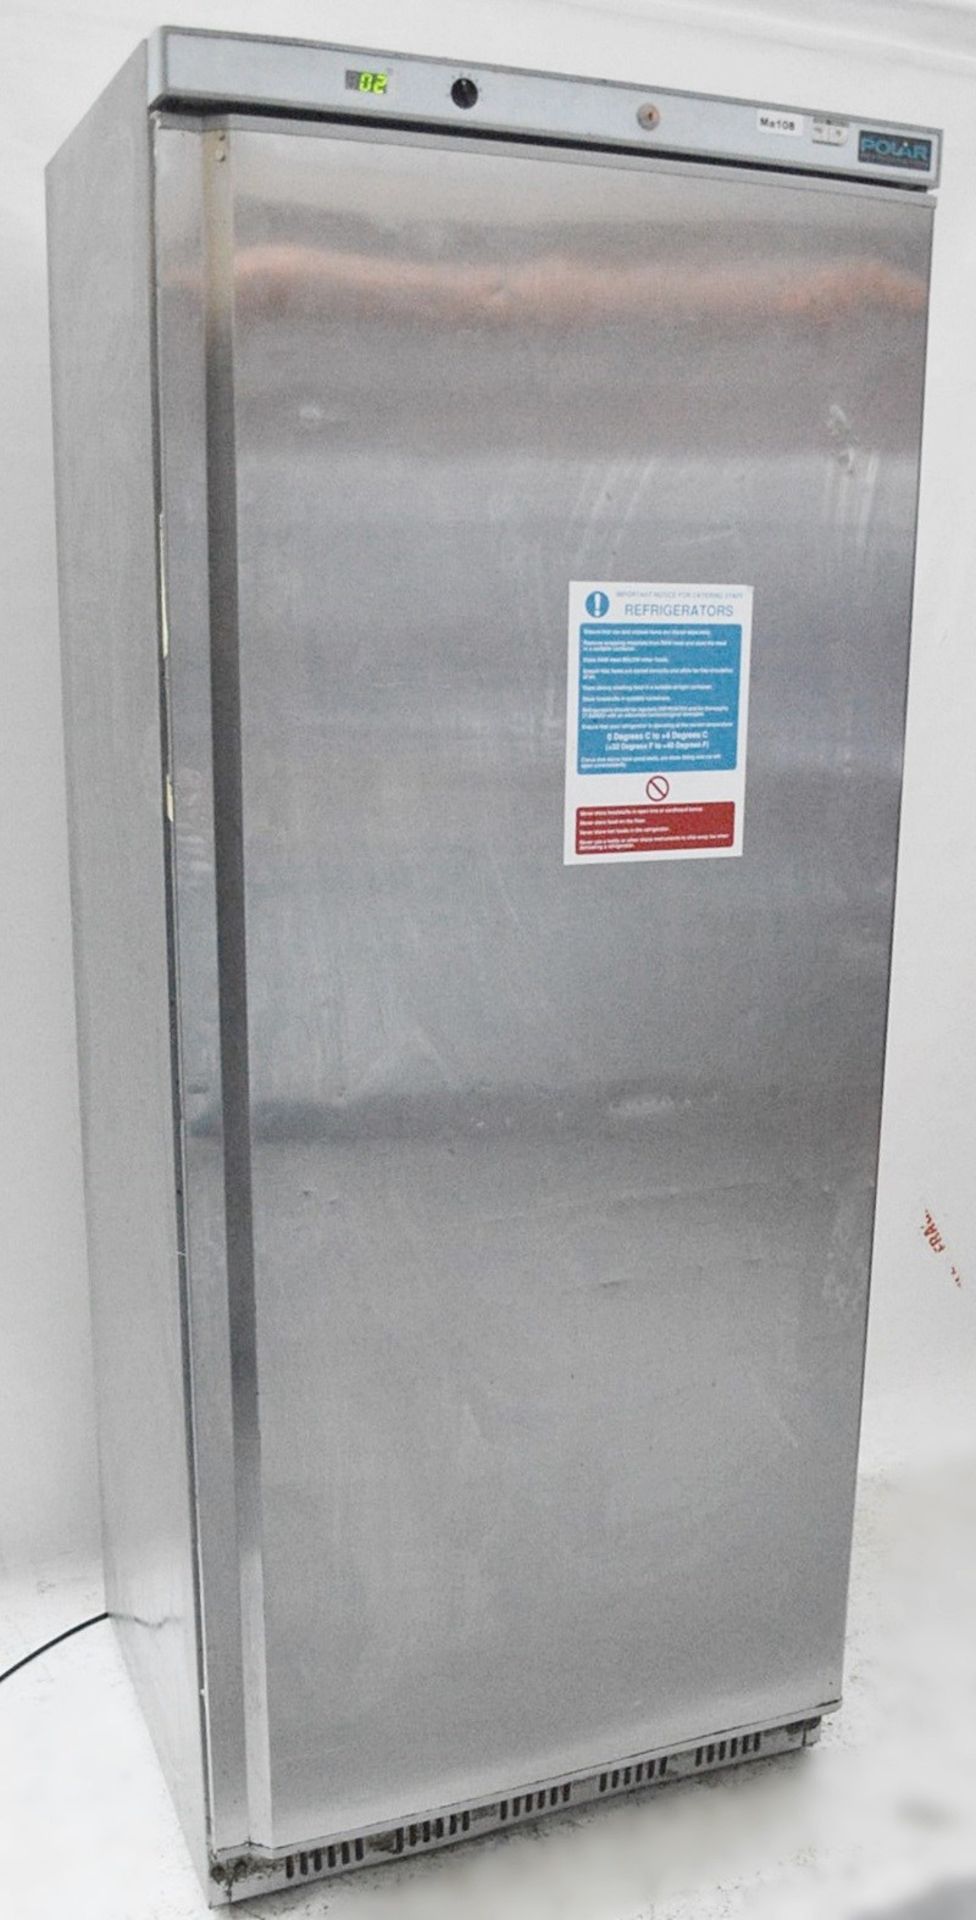 1 X POLAR CD084 600 LTR SINGLE DOOR UPRIGHT FRIDGE - RECENTLY REMOVED FROM A